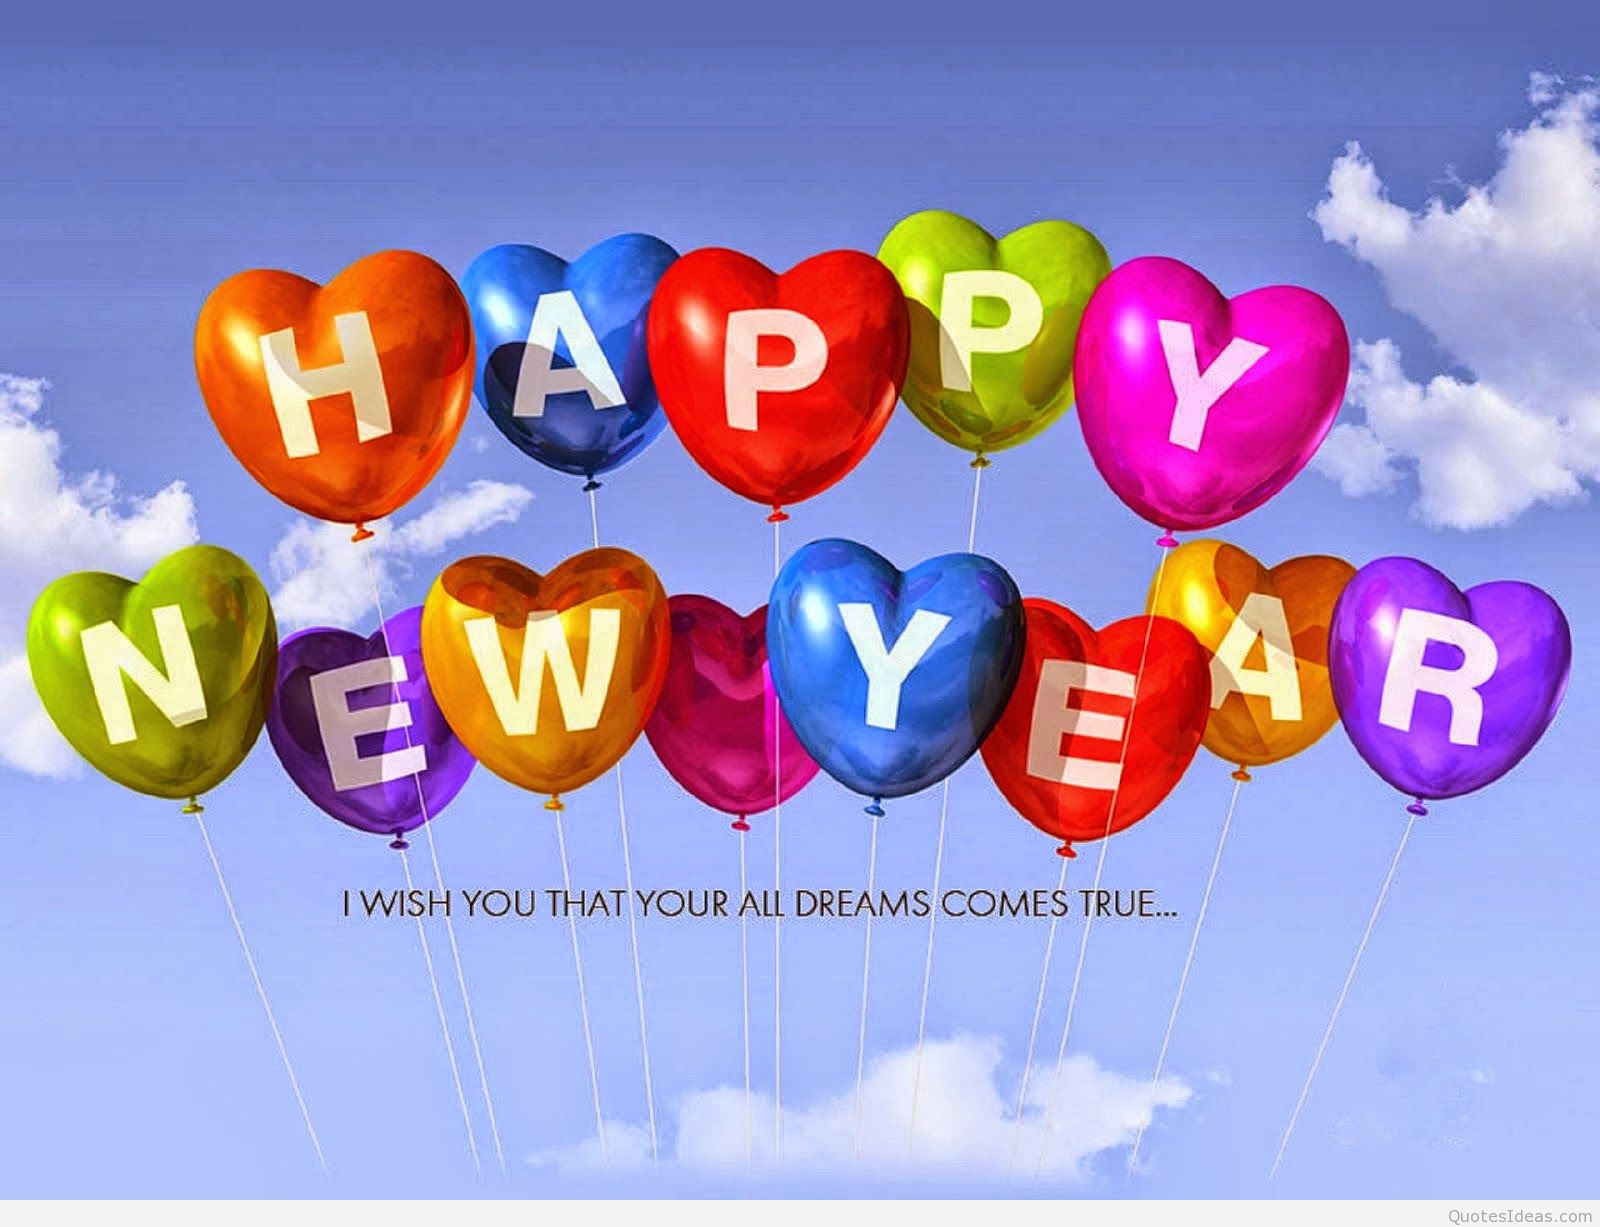 Happy New Year Heart Balloons I Wish You That Your All Dreams Comes True